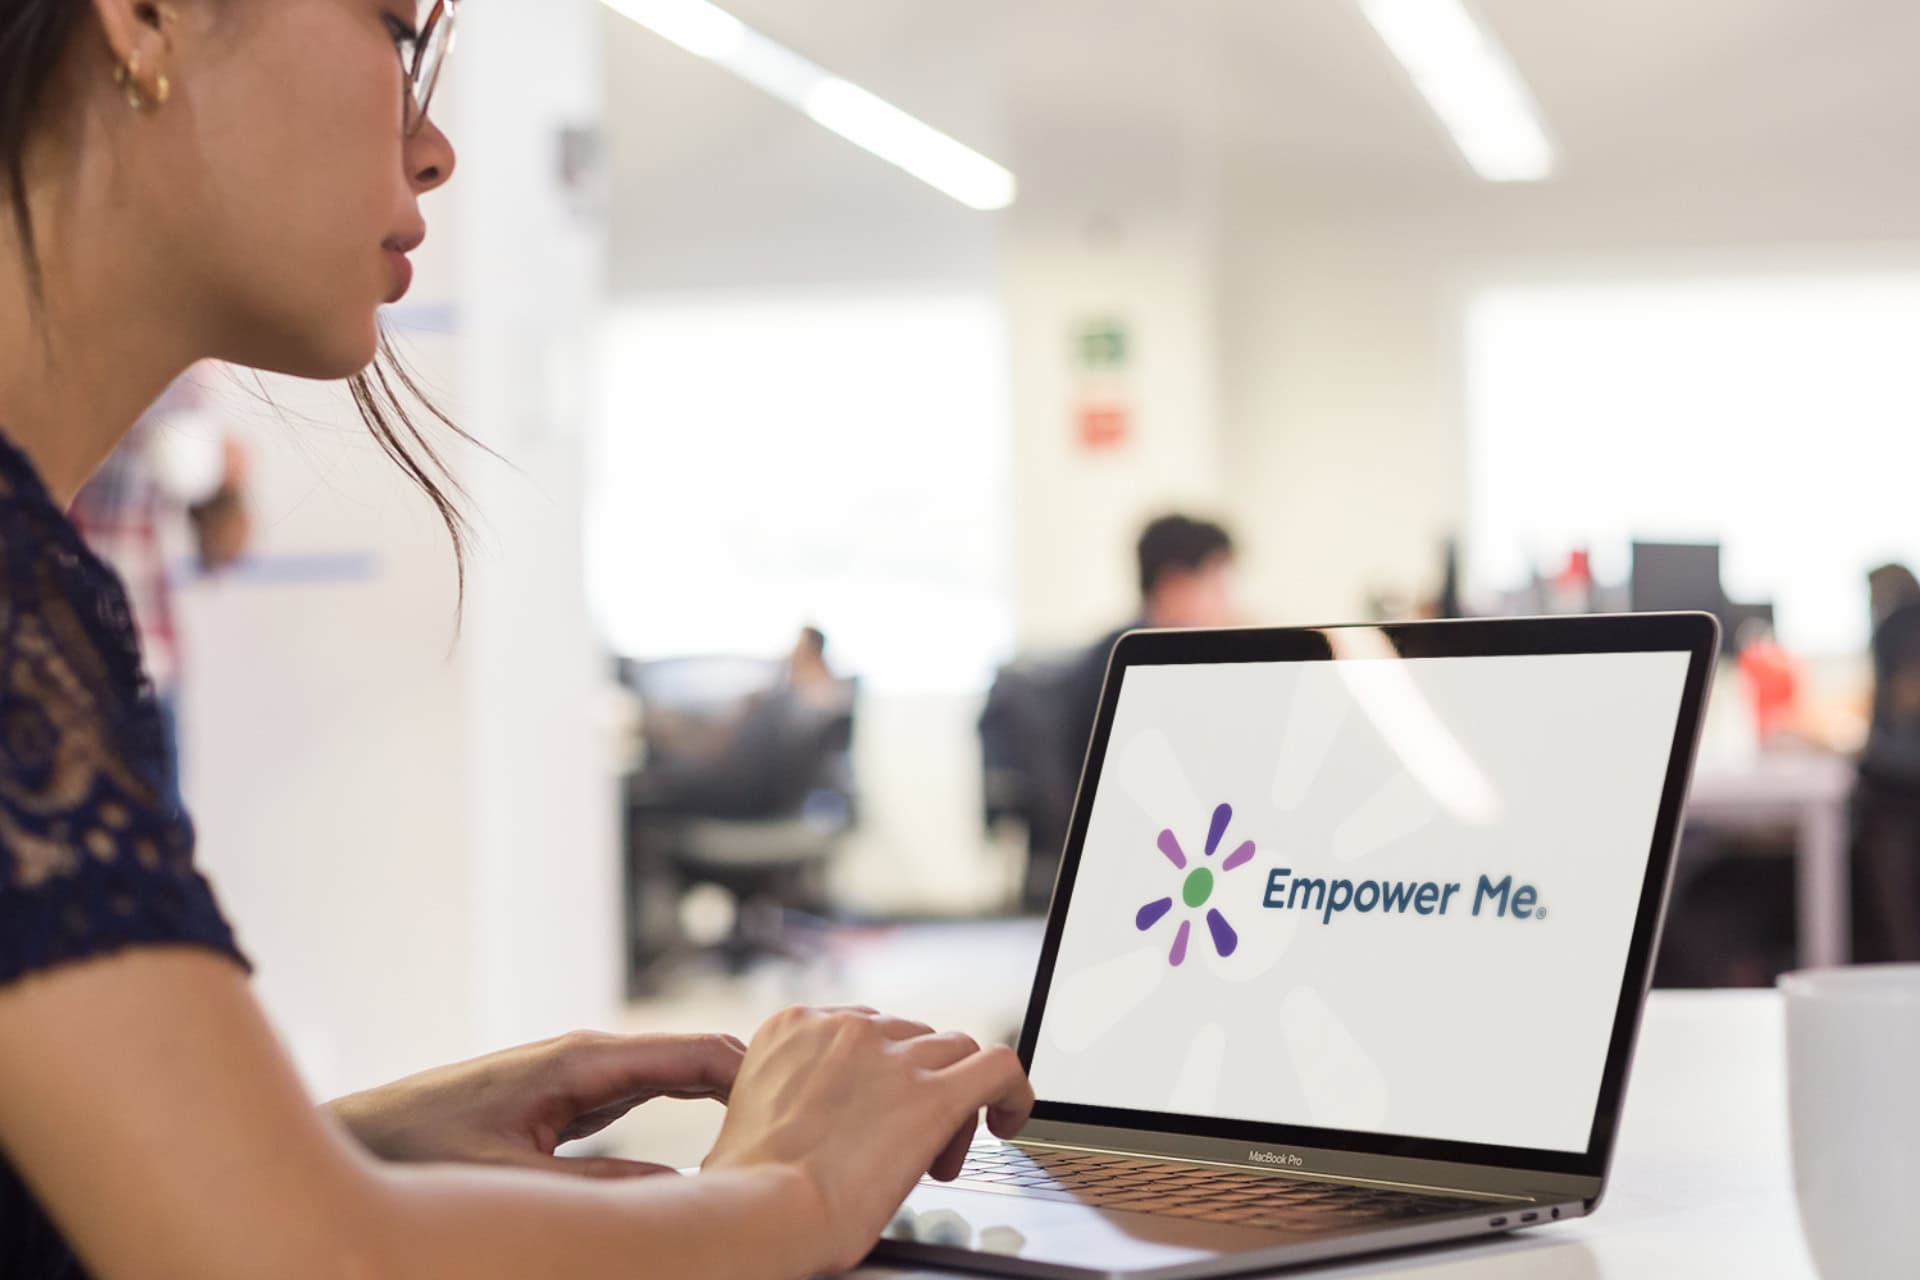 A woman looks at a mockup of a logo on her laptop. The logo text reads 'Empower Me' in brand colours.